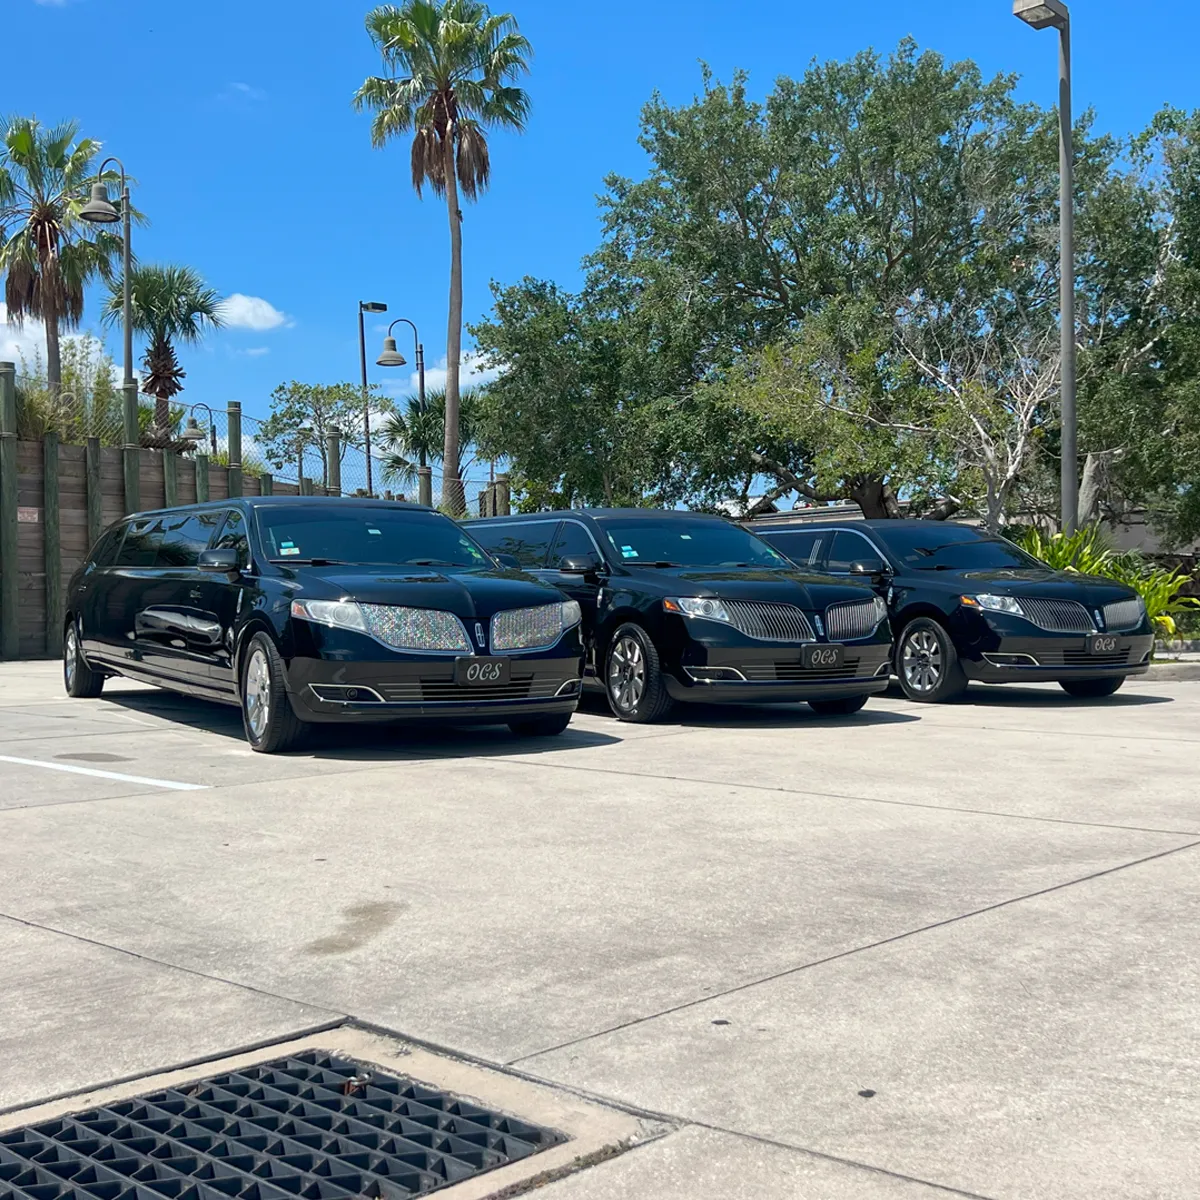 8 Passenger Limo to Port Canaveral